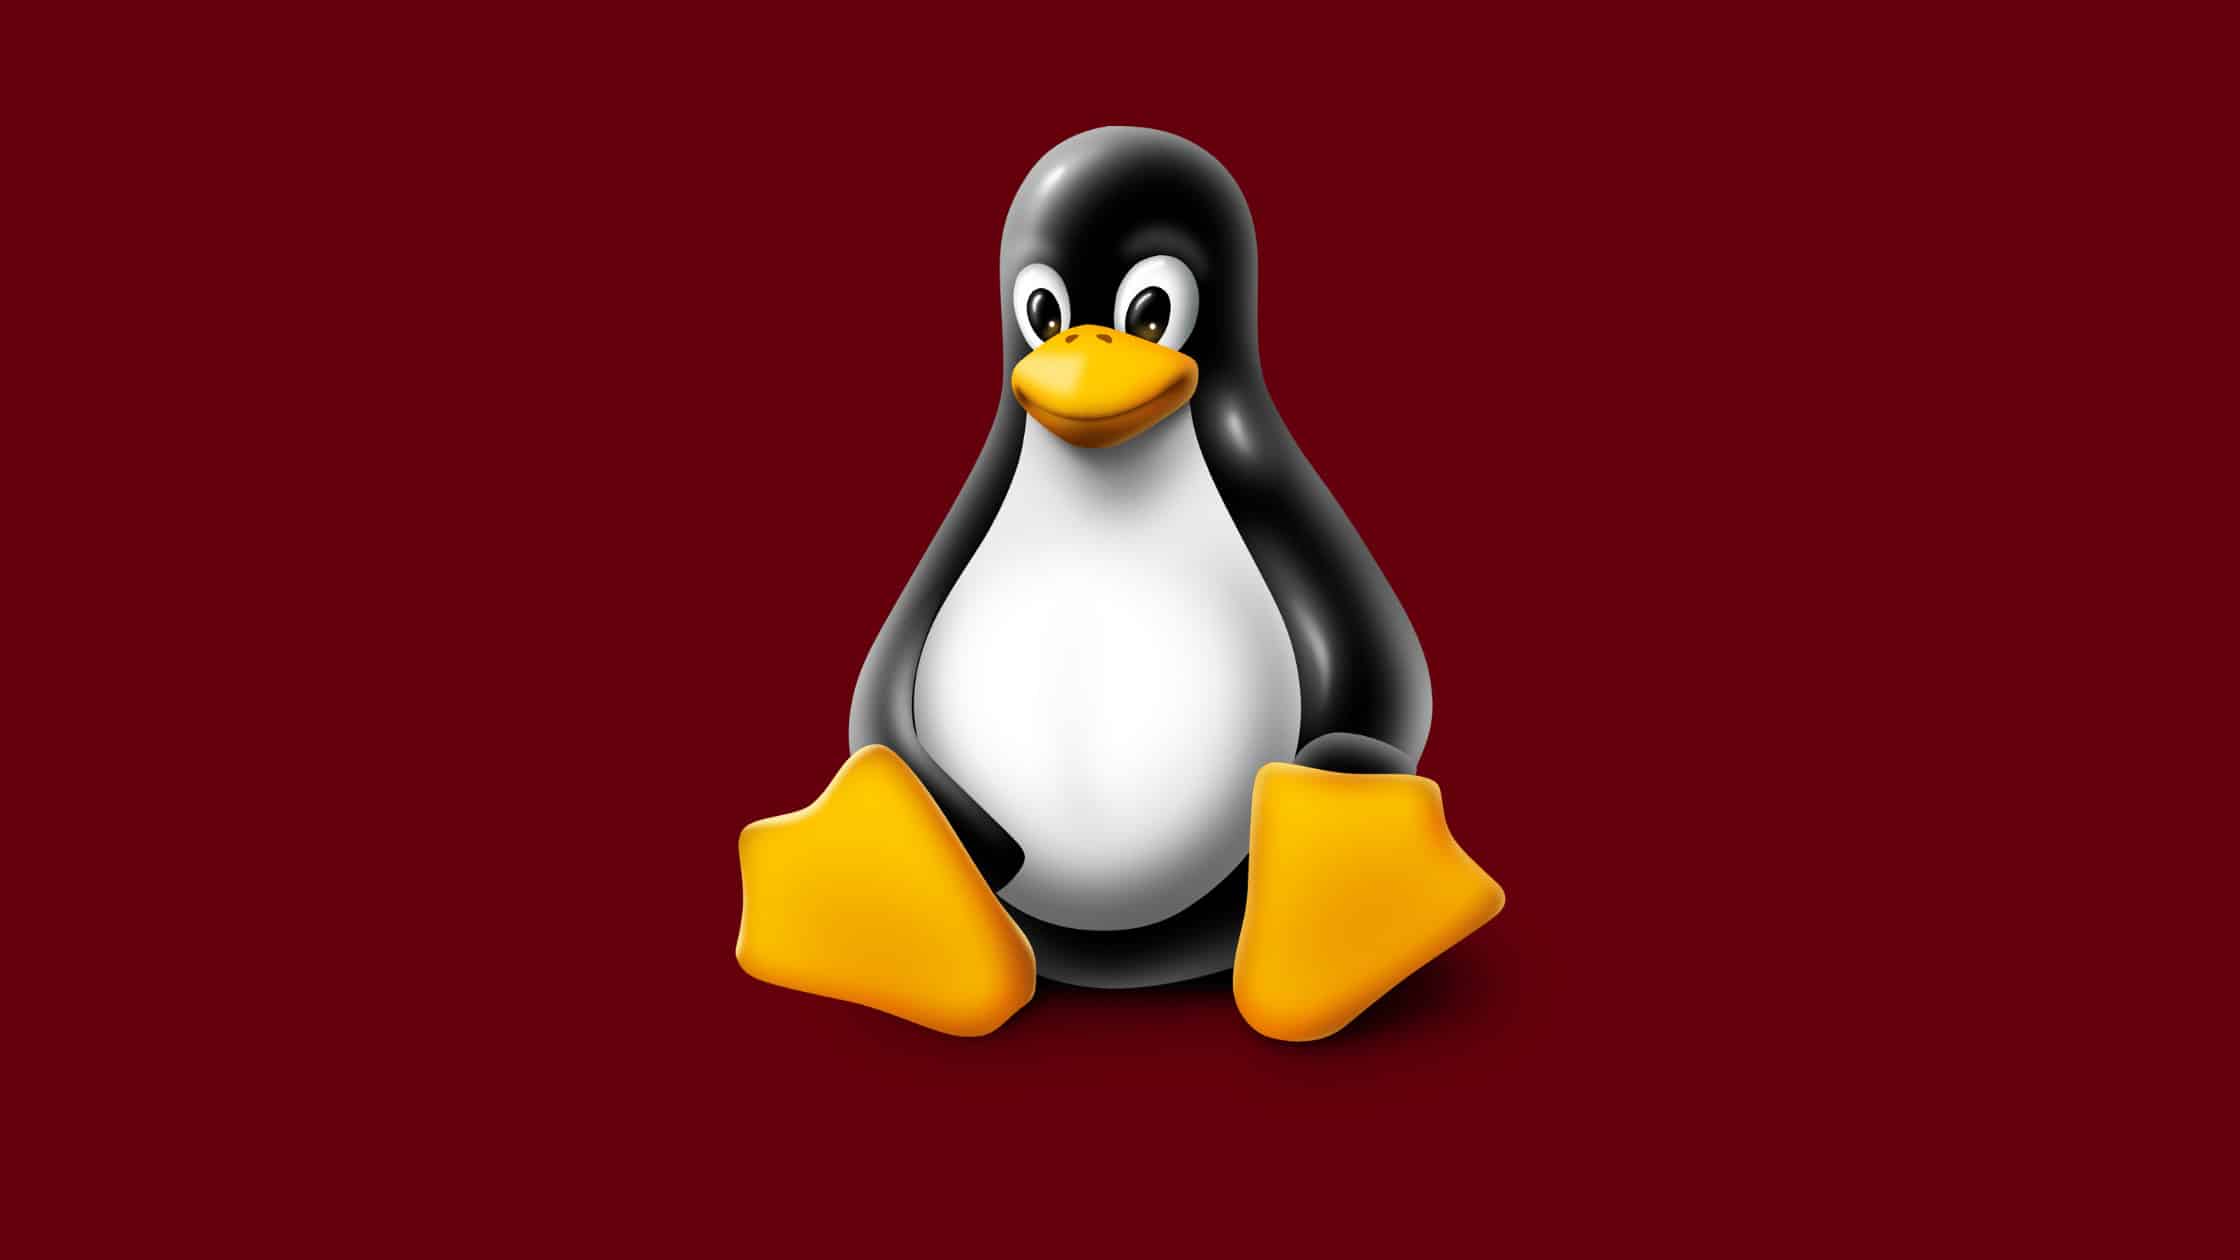 How Does Dirty Cred Vulnerability Work And How To Protect Your Linux Kernel From Dirty Cred Vulnerability